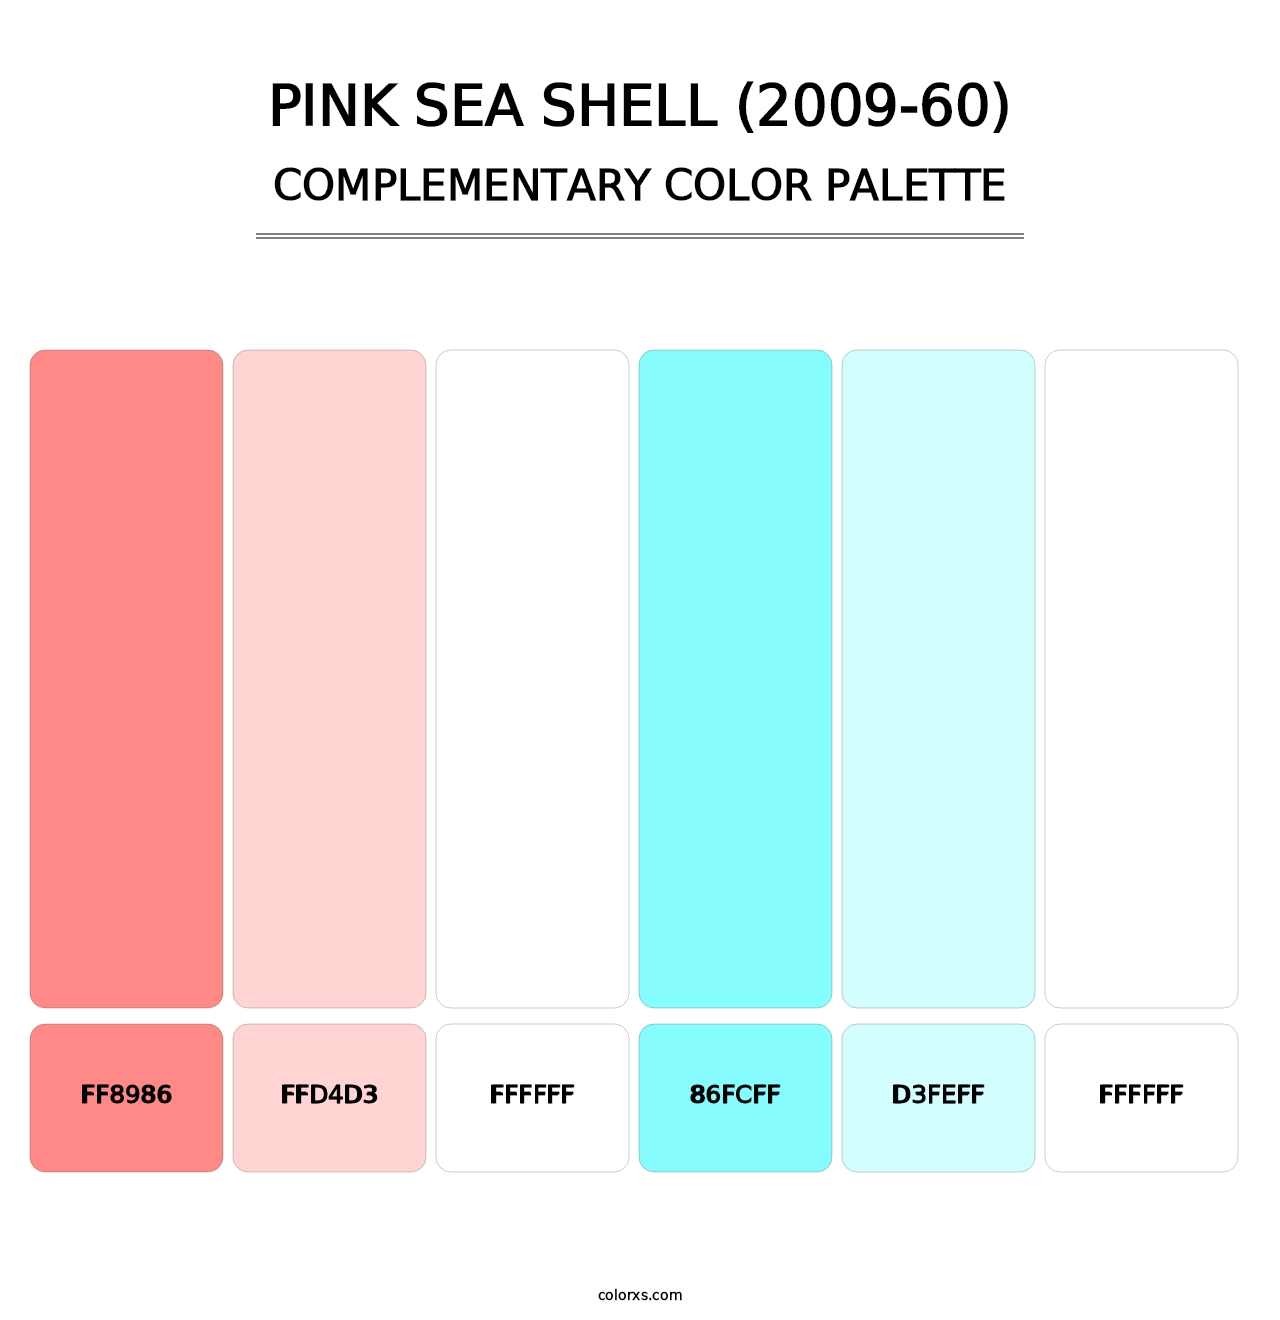 Pink Sea Shell (2009-60) - Complementary Color Palette